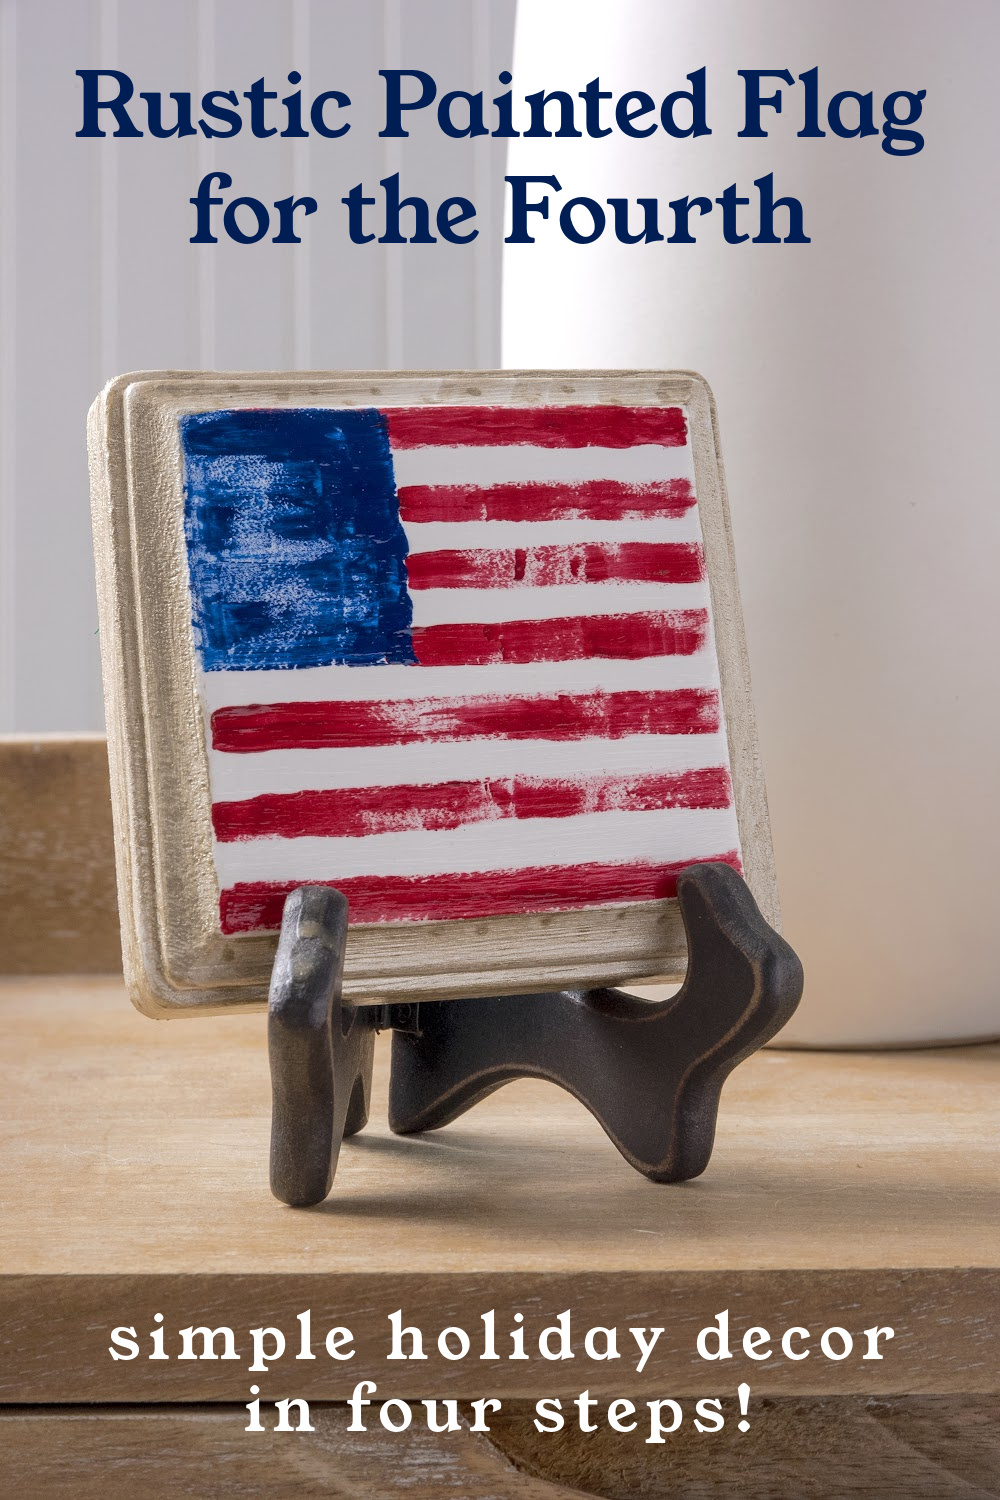 Rustic Painted Flag for the 4th of July